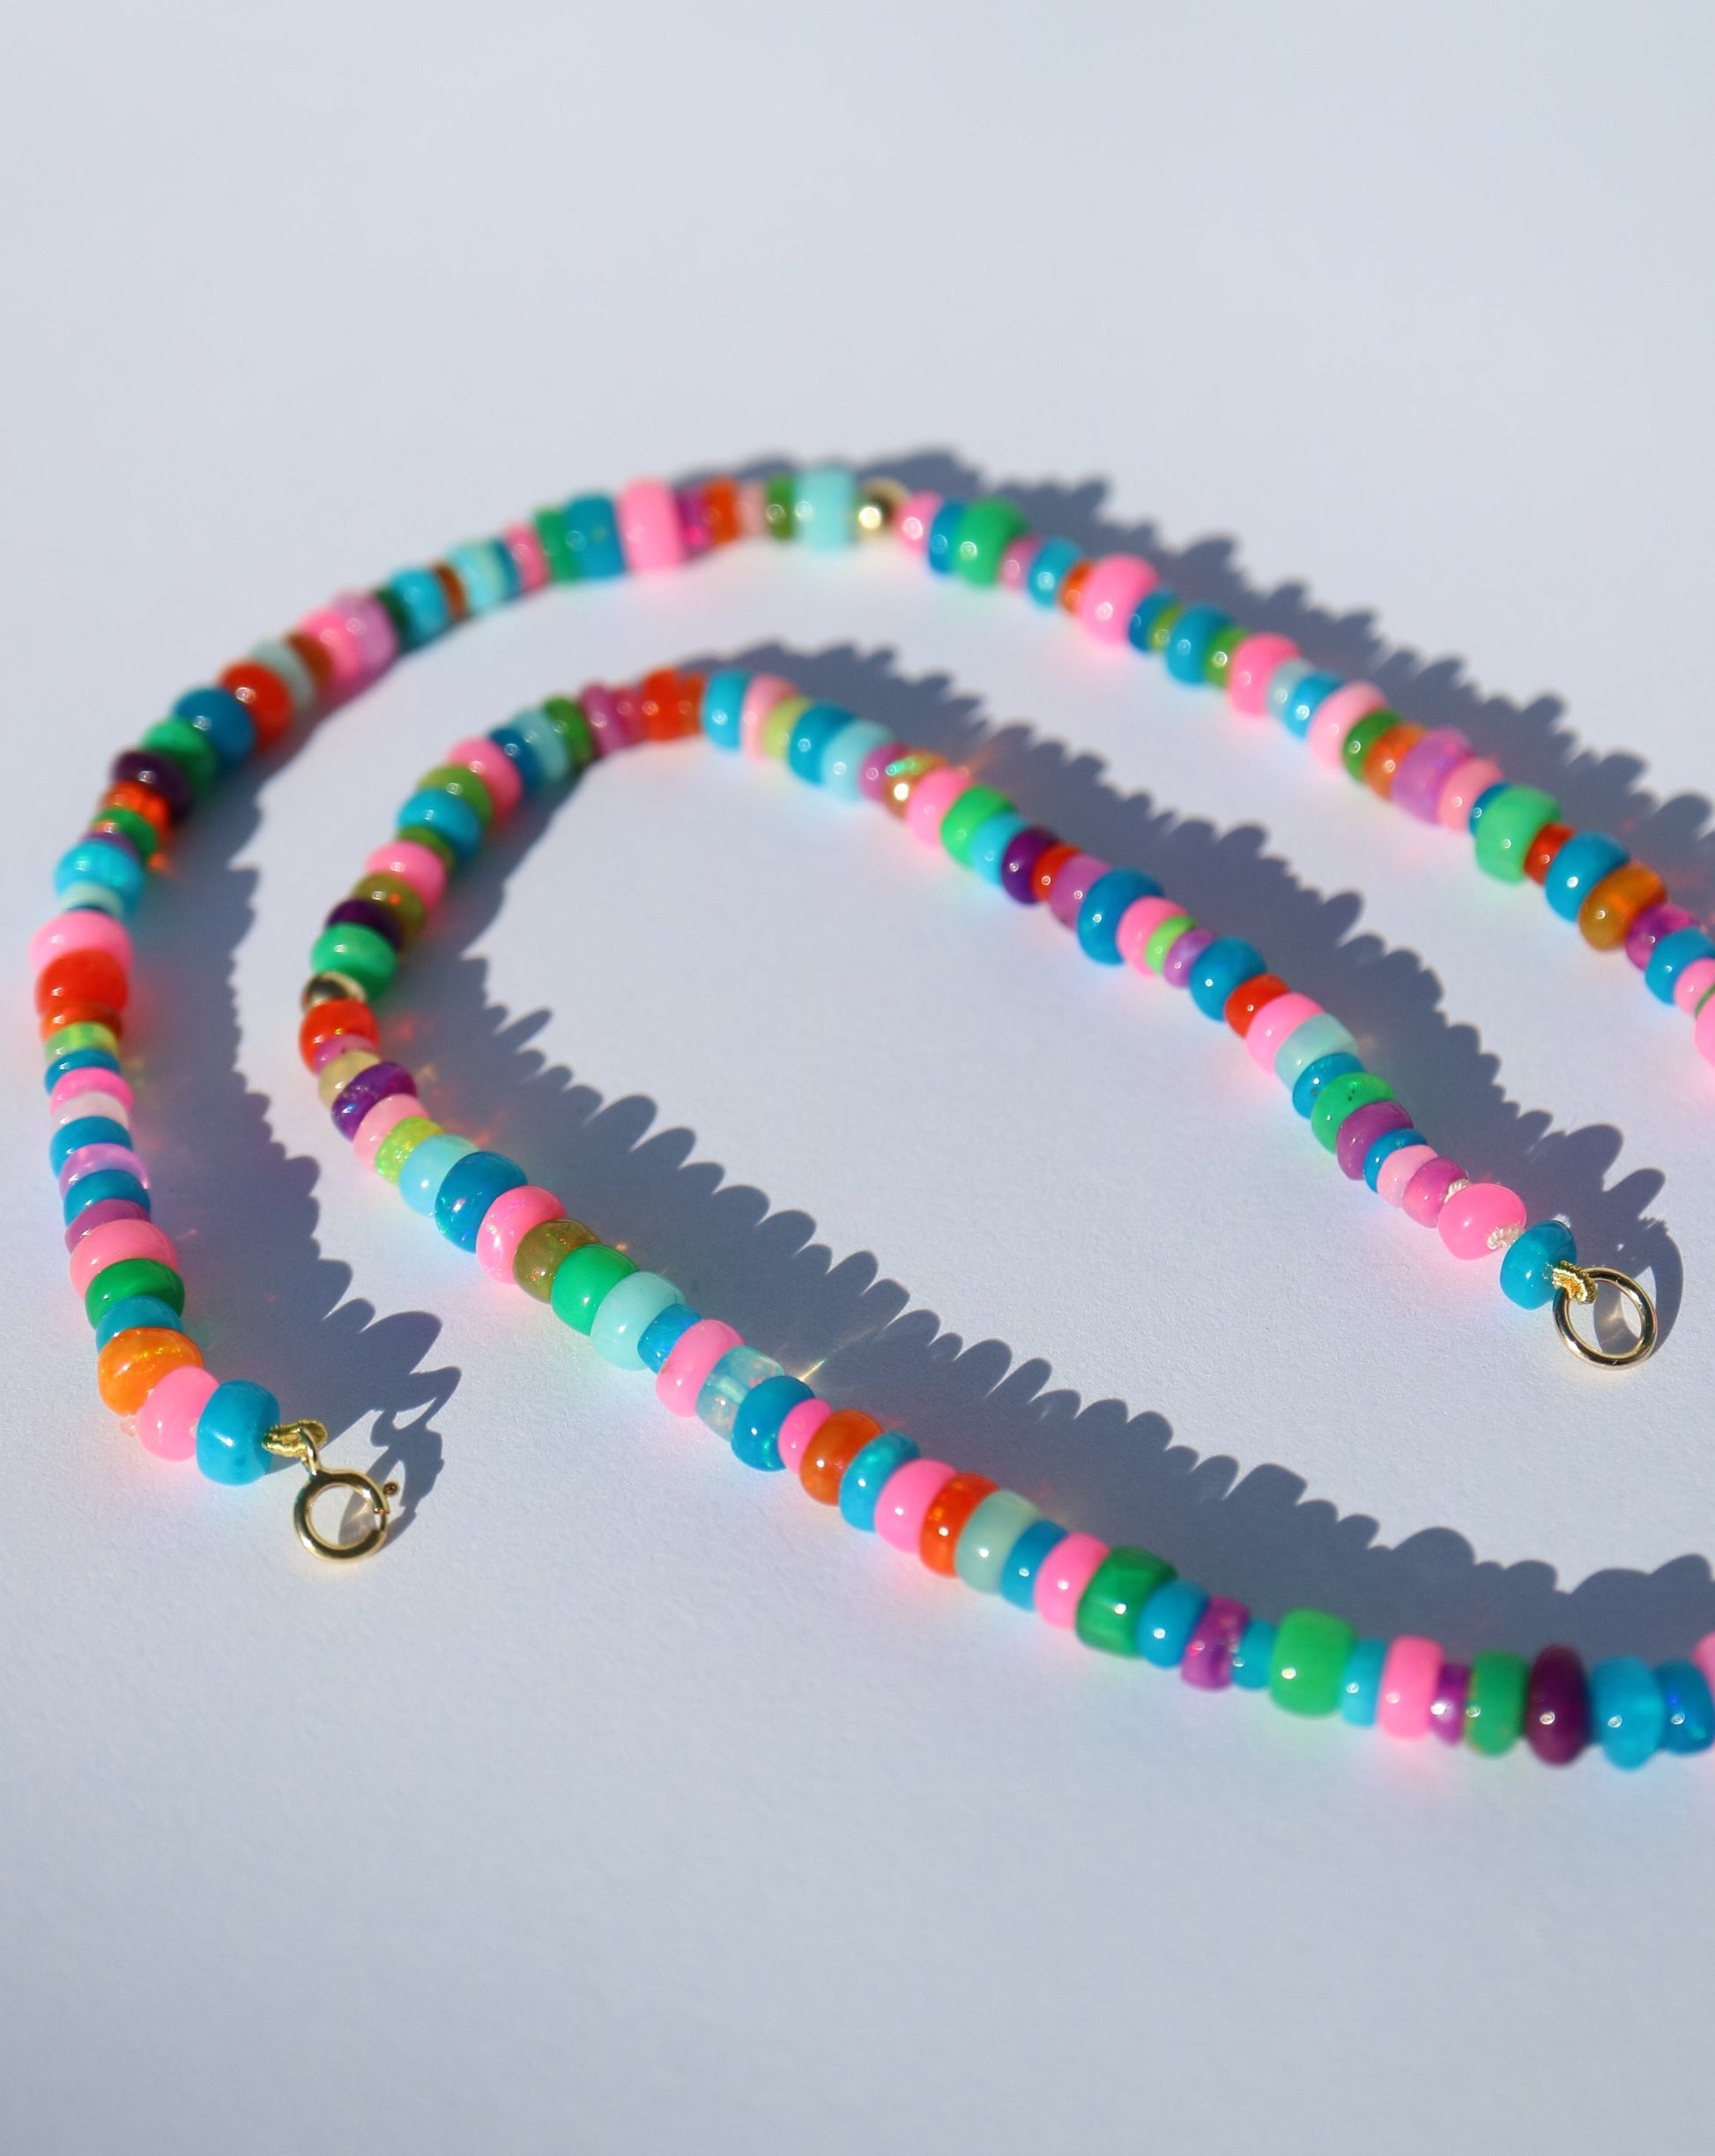 Malibu Necklace made with Ethiopian Opal Beads